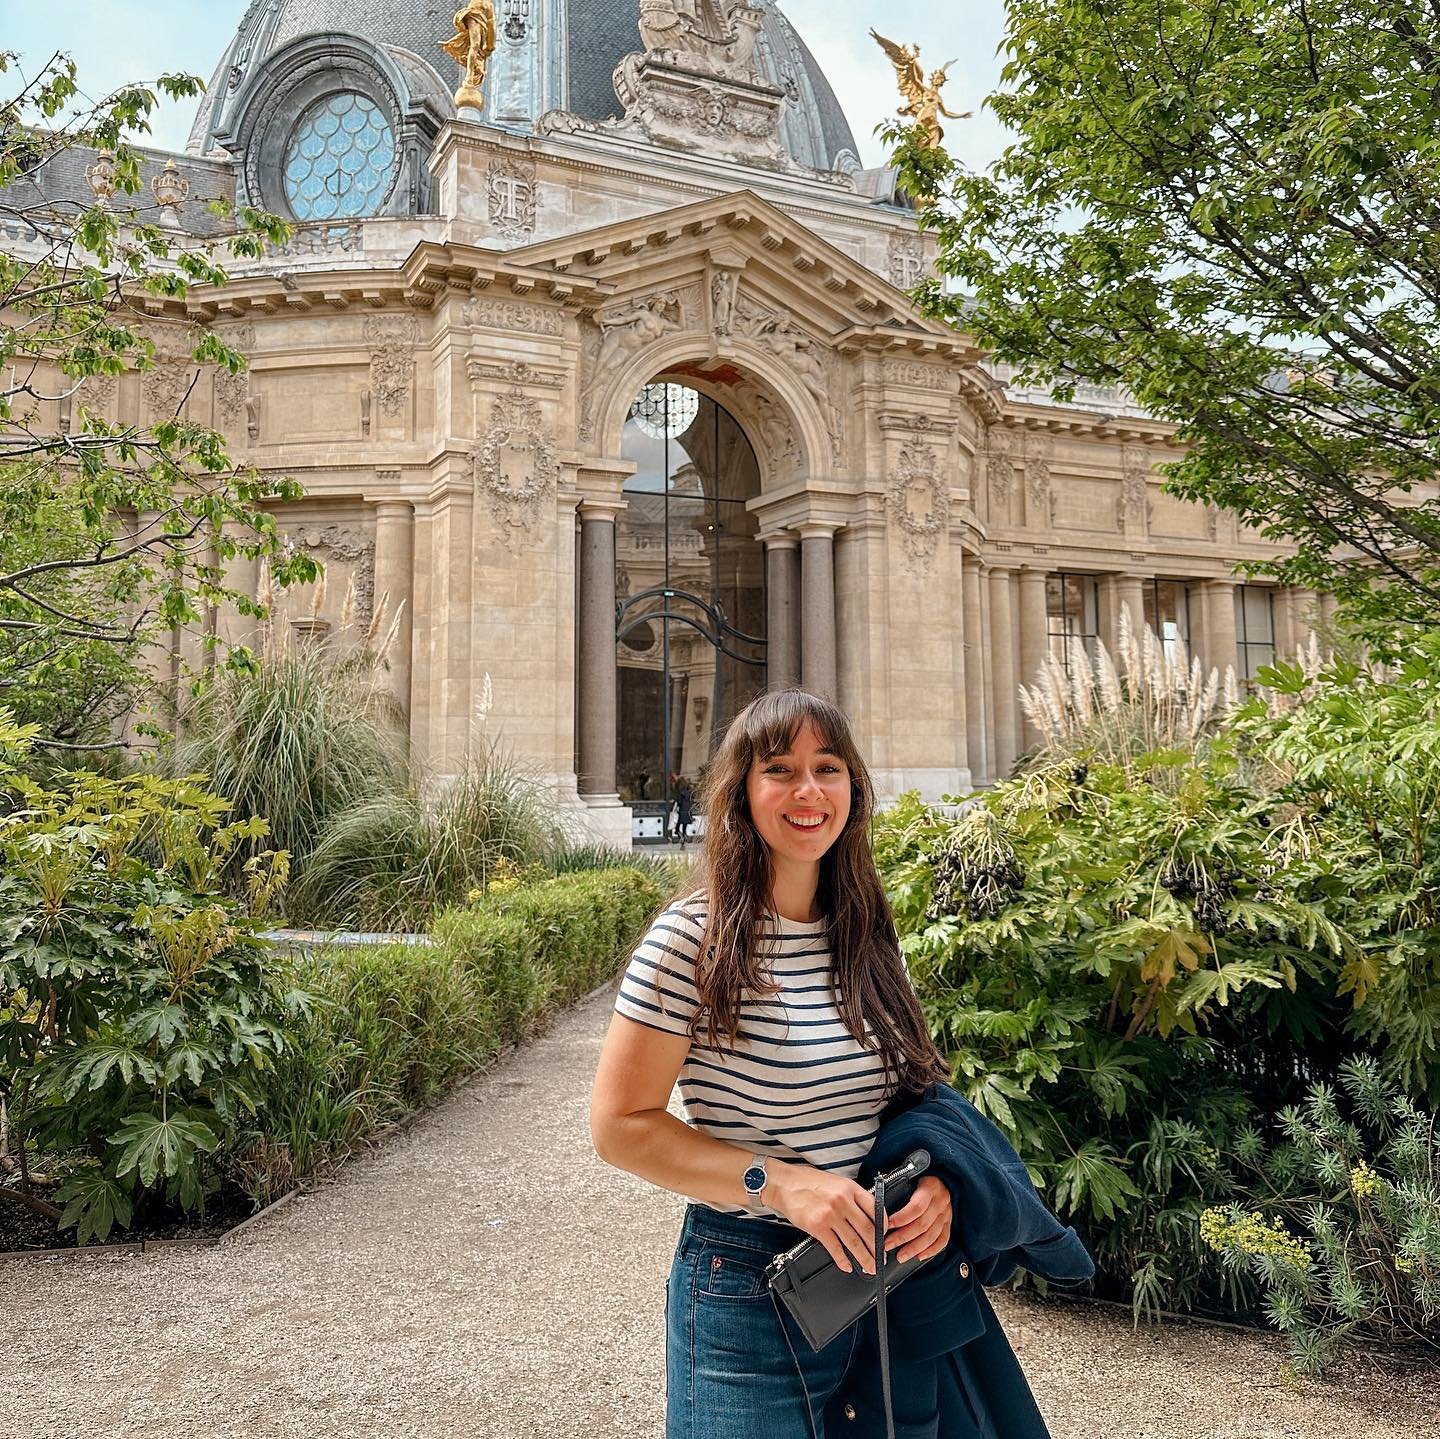 Paris in a nutshell. Based on the most important things to do ☺️ cafes, food and walks in the park. #onlyinparis
&bull;
&bull;
&bull;
Paris summer style, Paris travel guide, French girl style, French girl daily, Paris cafes. #oldmoneyaesthetic #frenc